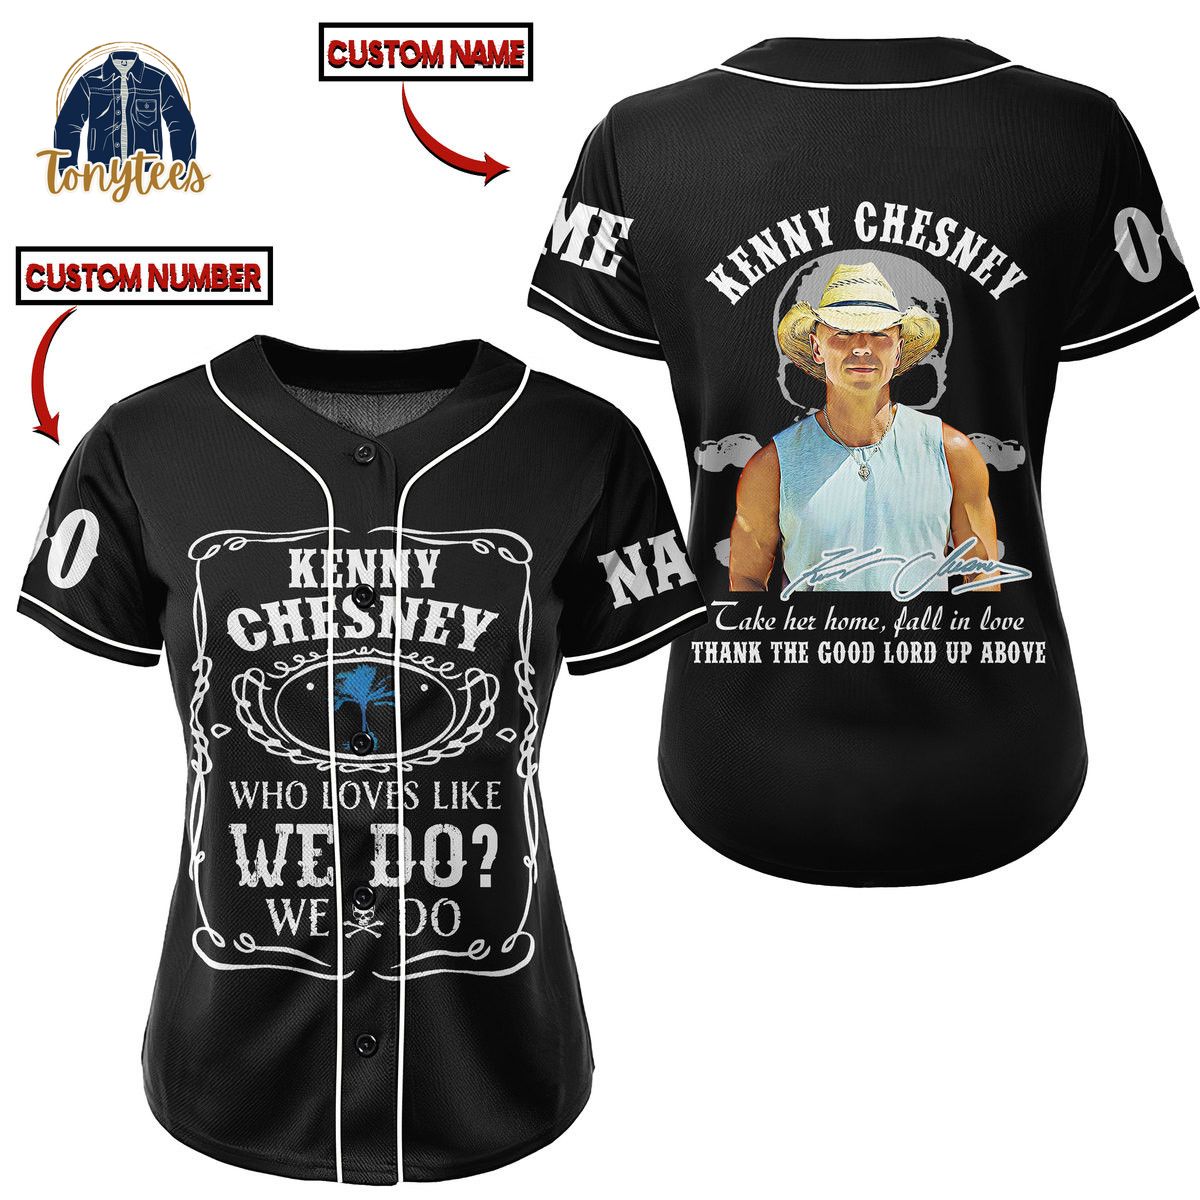 Kenny Chesney who loves like we do personalized baseball jersey